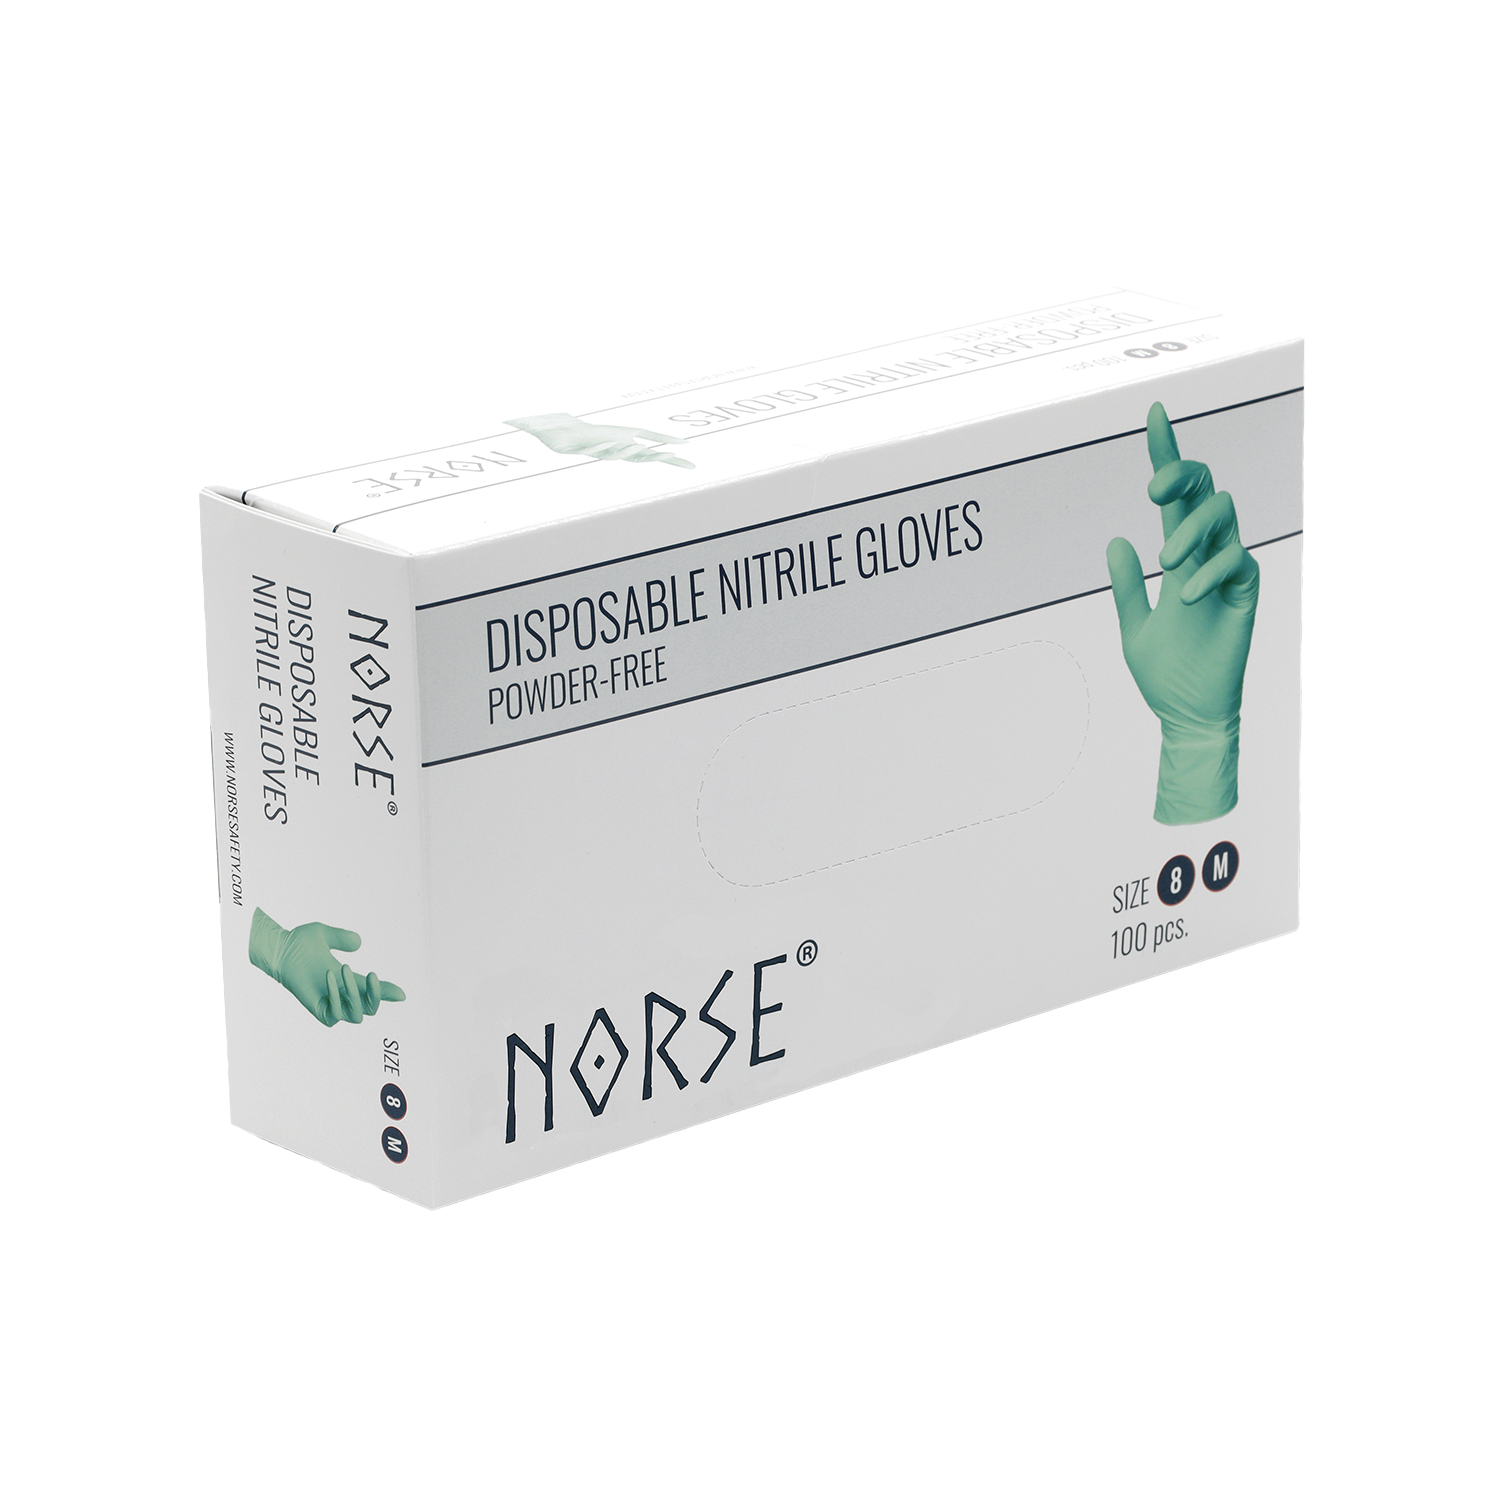 NORSE Disposable Green Green disposable nitrile gloves - size 8/M